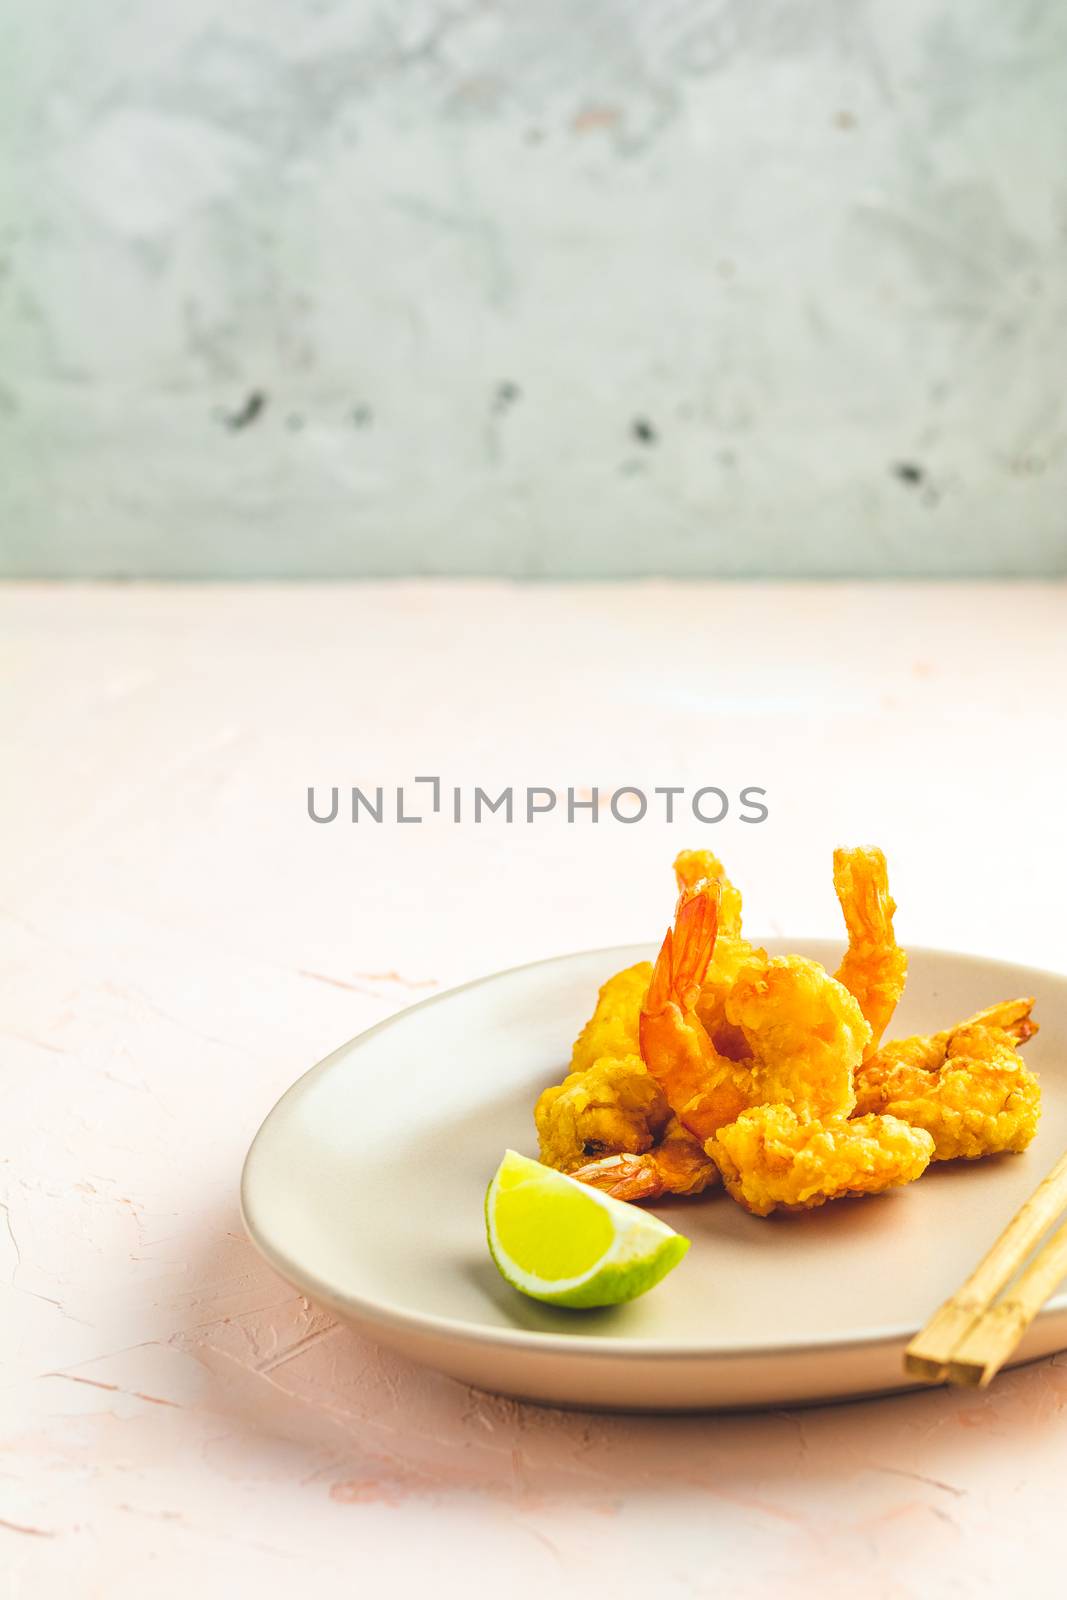 Shrimps tempura in light plate on pink or peach concrete surface by ArtSvitlyna